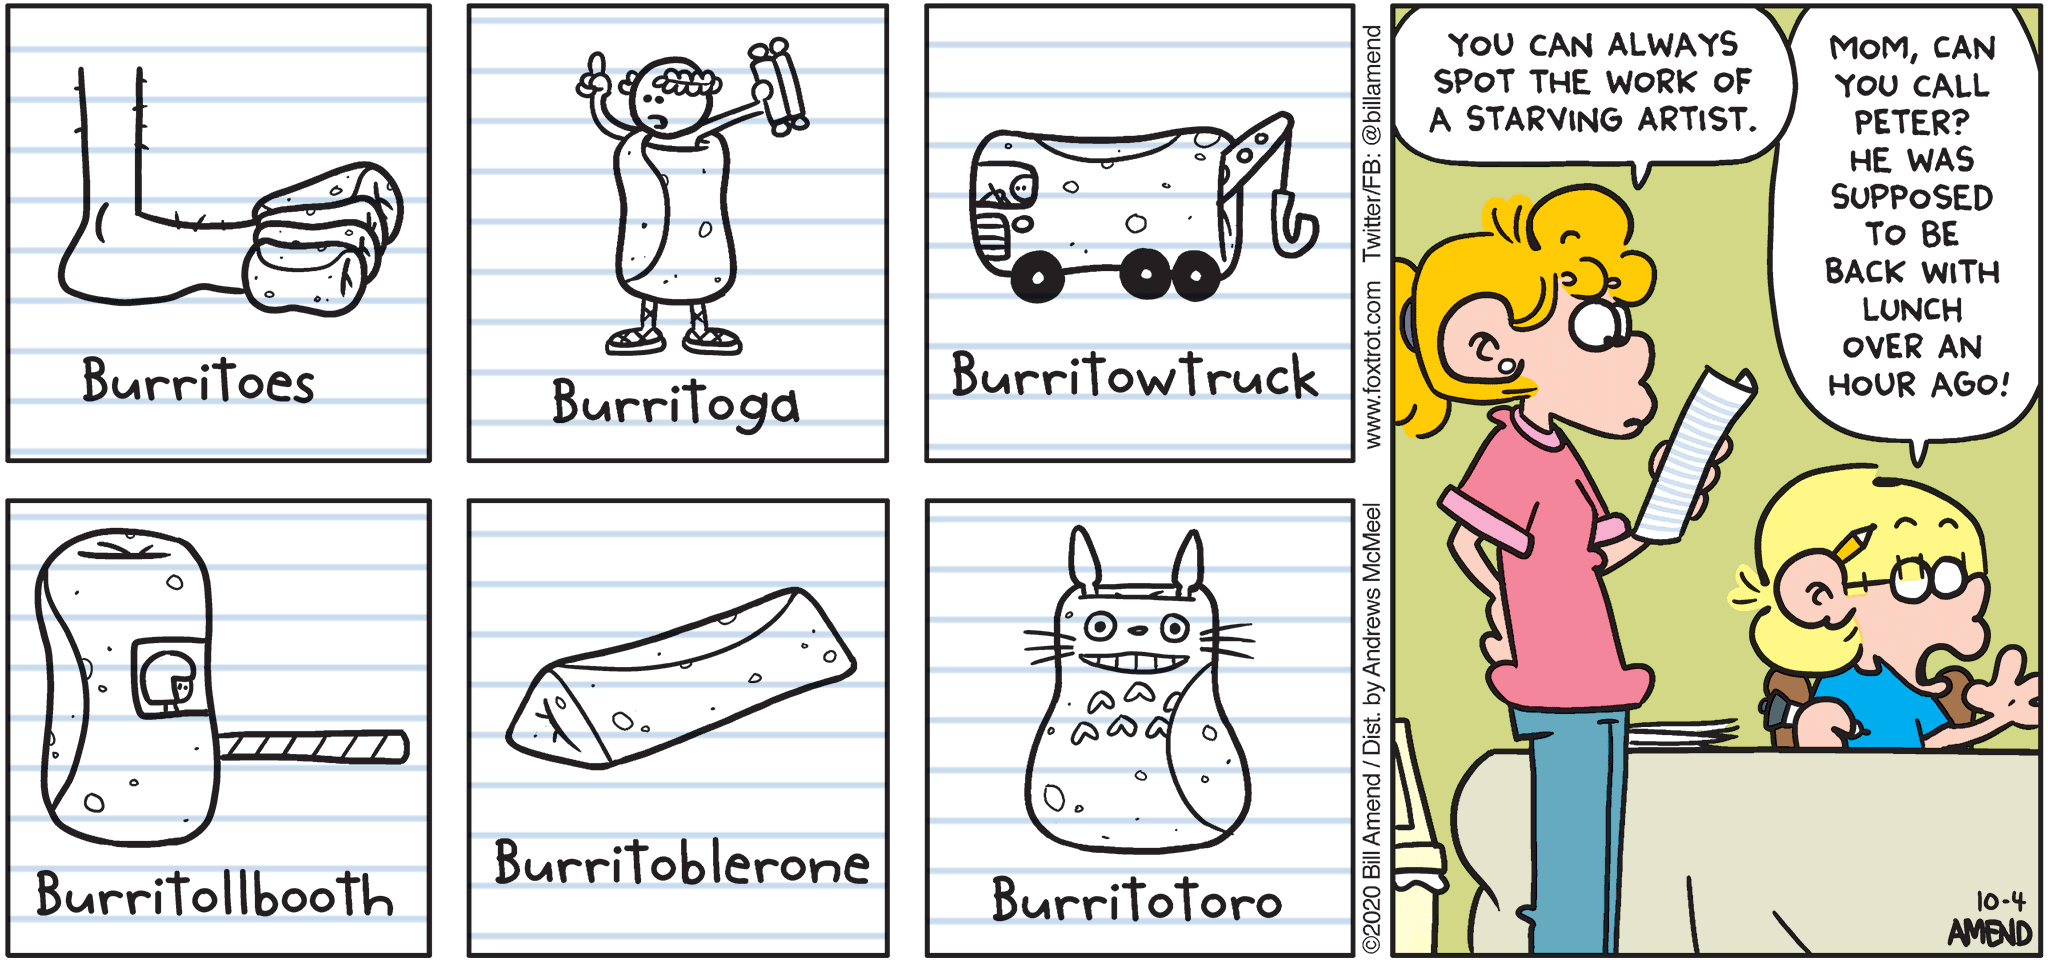 FoxTrot comic strip by Bill Amend - "Starving Art" published October 4, 2020 - Burritoes, Burritoga, Burritowtruck, Burritollbooth, Burritoblerone, Burritotoro. Paige Fox: You can always spot the work of a starving artist. Jason Fox: Mom, can you call Peter? He was supposed to be back with lunch over an hour ago!